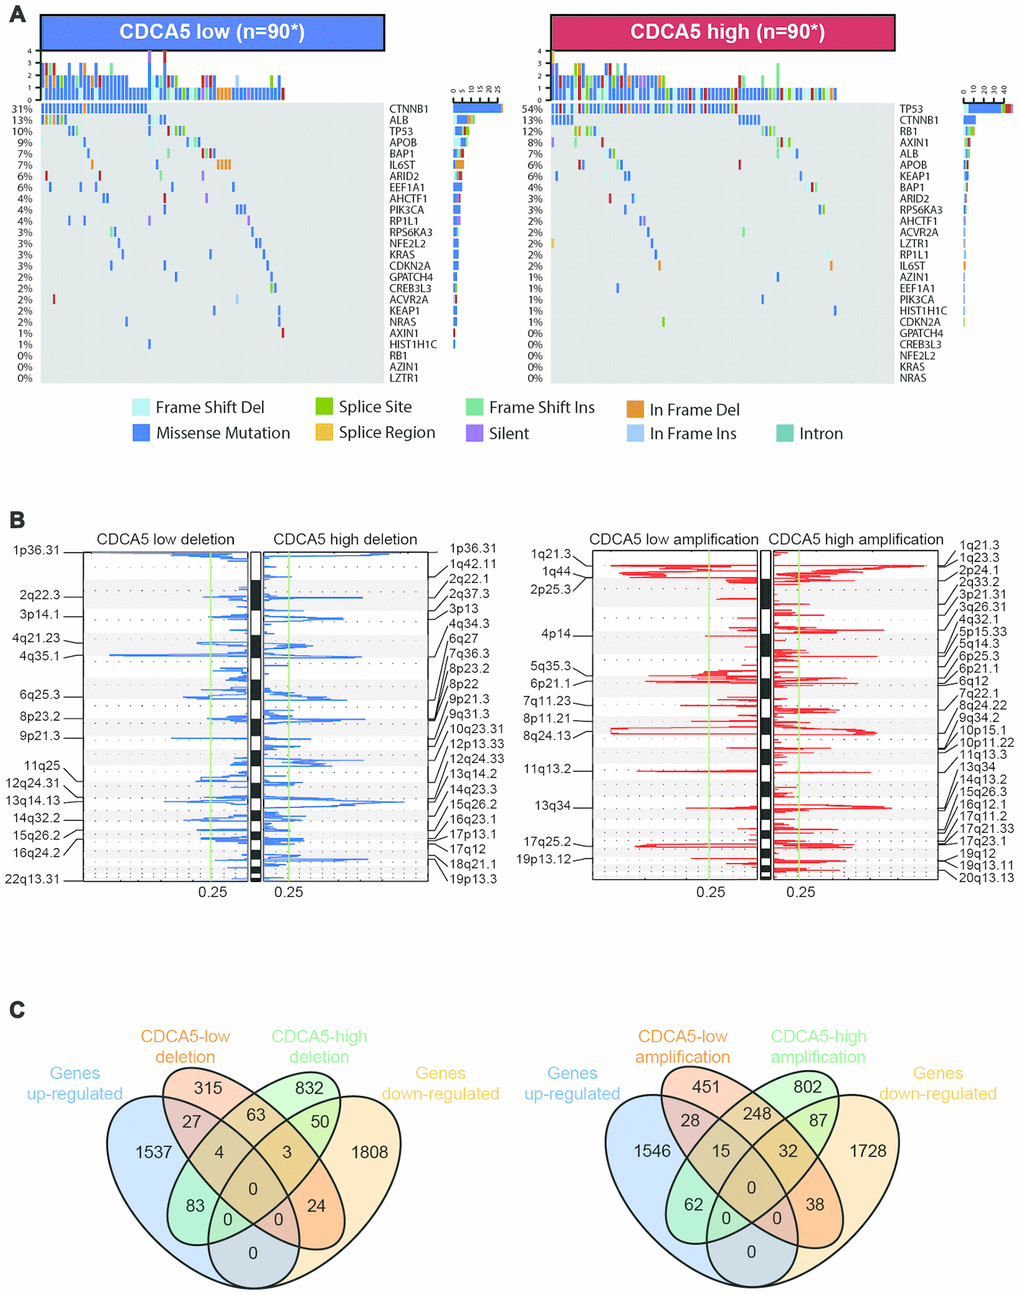 Association between CDCA5 and mutational signatures, copy number variation in HCC. (A) Significantly mutated genes in HCC subsets stratified by CDCA5 expression. (B) GISTIC2.0 analysis identified recurrent somatic copy number alterations in different HCC subsets stratified by CDCA5 expression. (C) Venn diagrams demonstrating the number of genes within genomic regions showing significant amplification or deletion, as well as the overlay with significant genes identified from RNAseq in CDCA5-high and -low patients. Each circle in the Venn diagram represents one set and the number in the overlaid area represents the common genes between the sets.